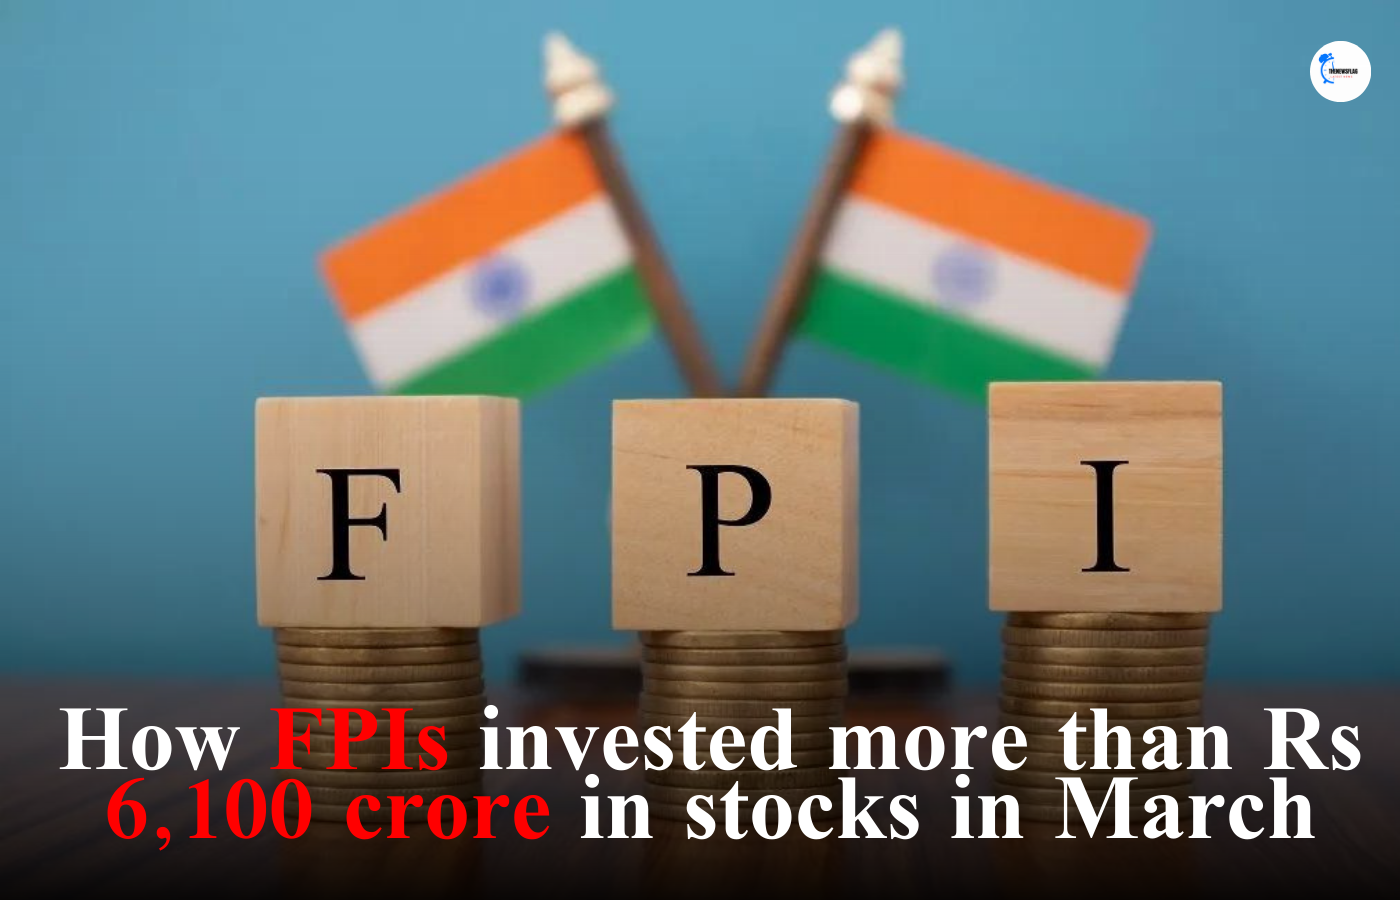 FPIs invested more than Rs 6100 crore in stocks in March